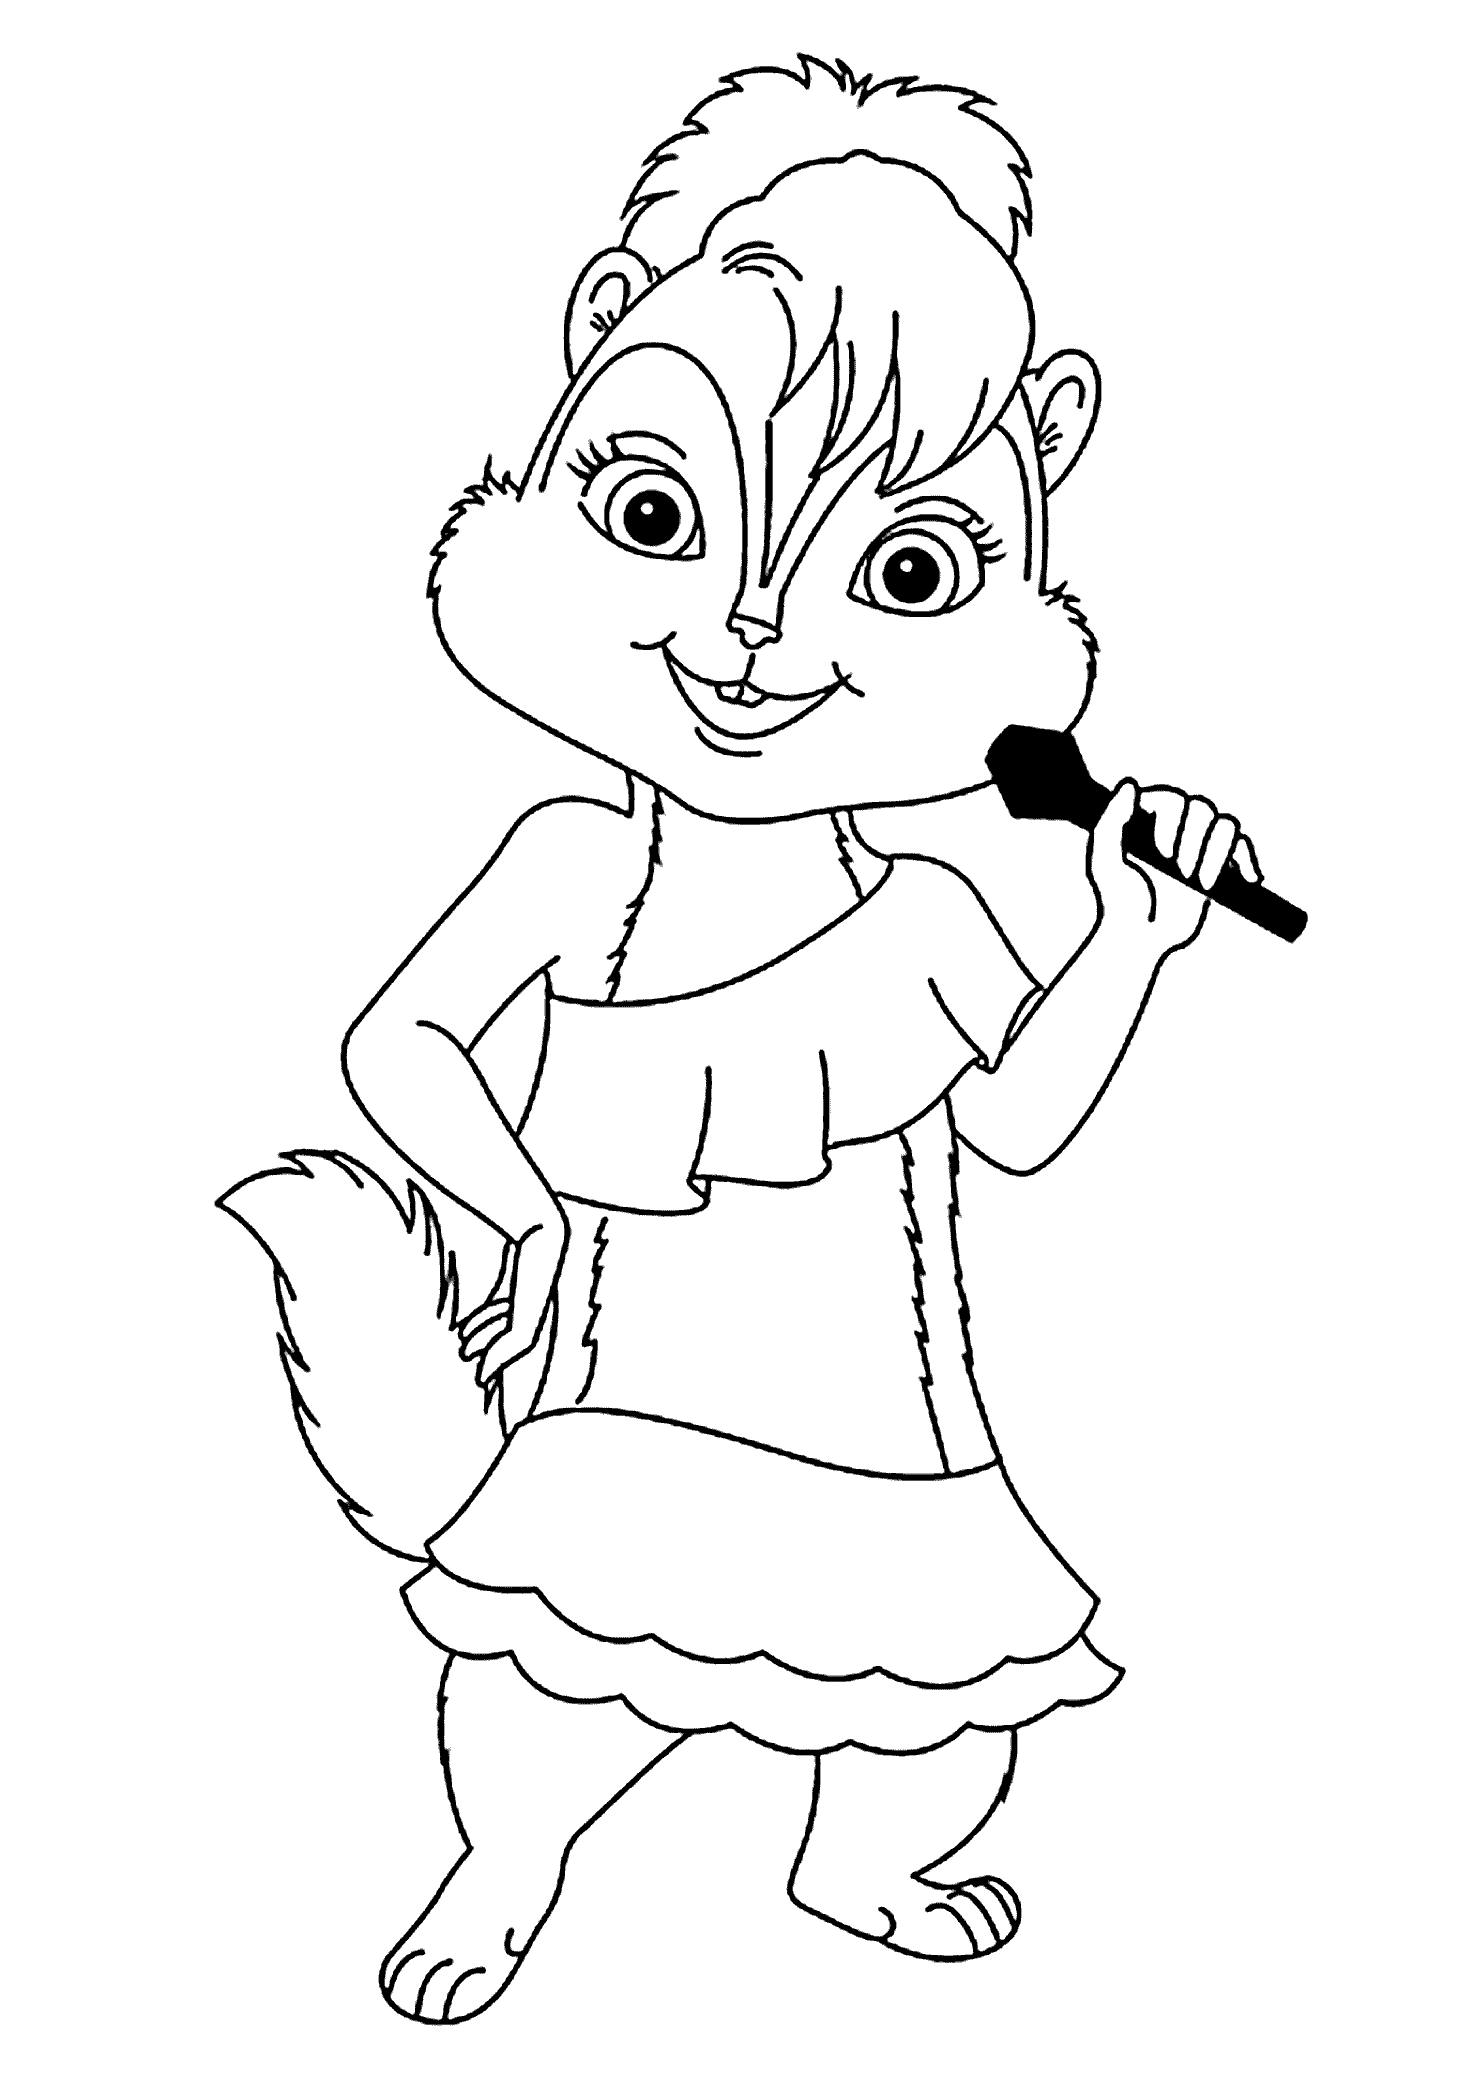 alvin and the chipmunks coloring pages - High Quality Coloring Pages